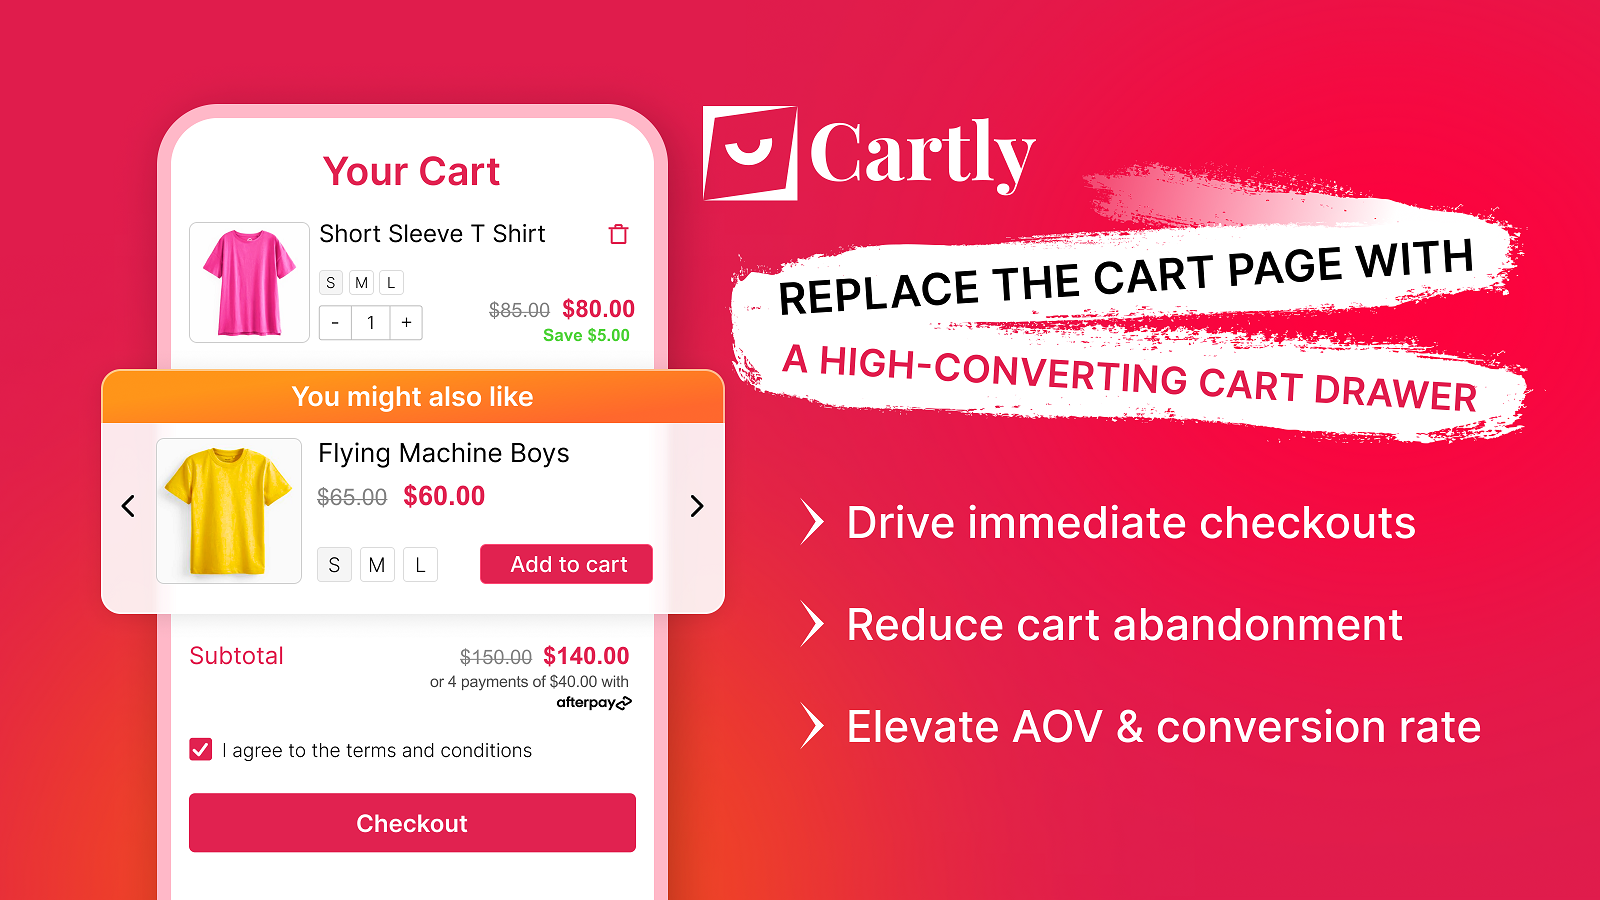 enhance AOV with cart drawer upsells and cross sell